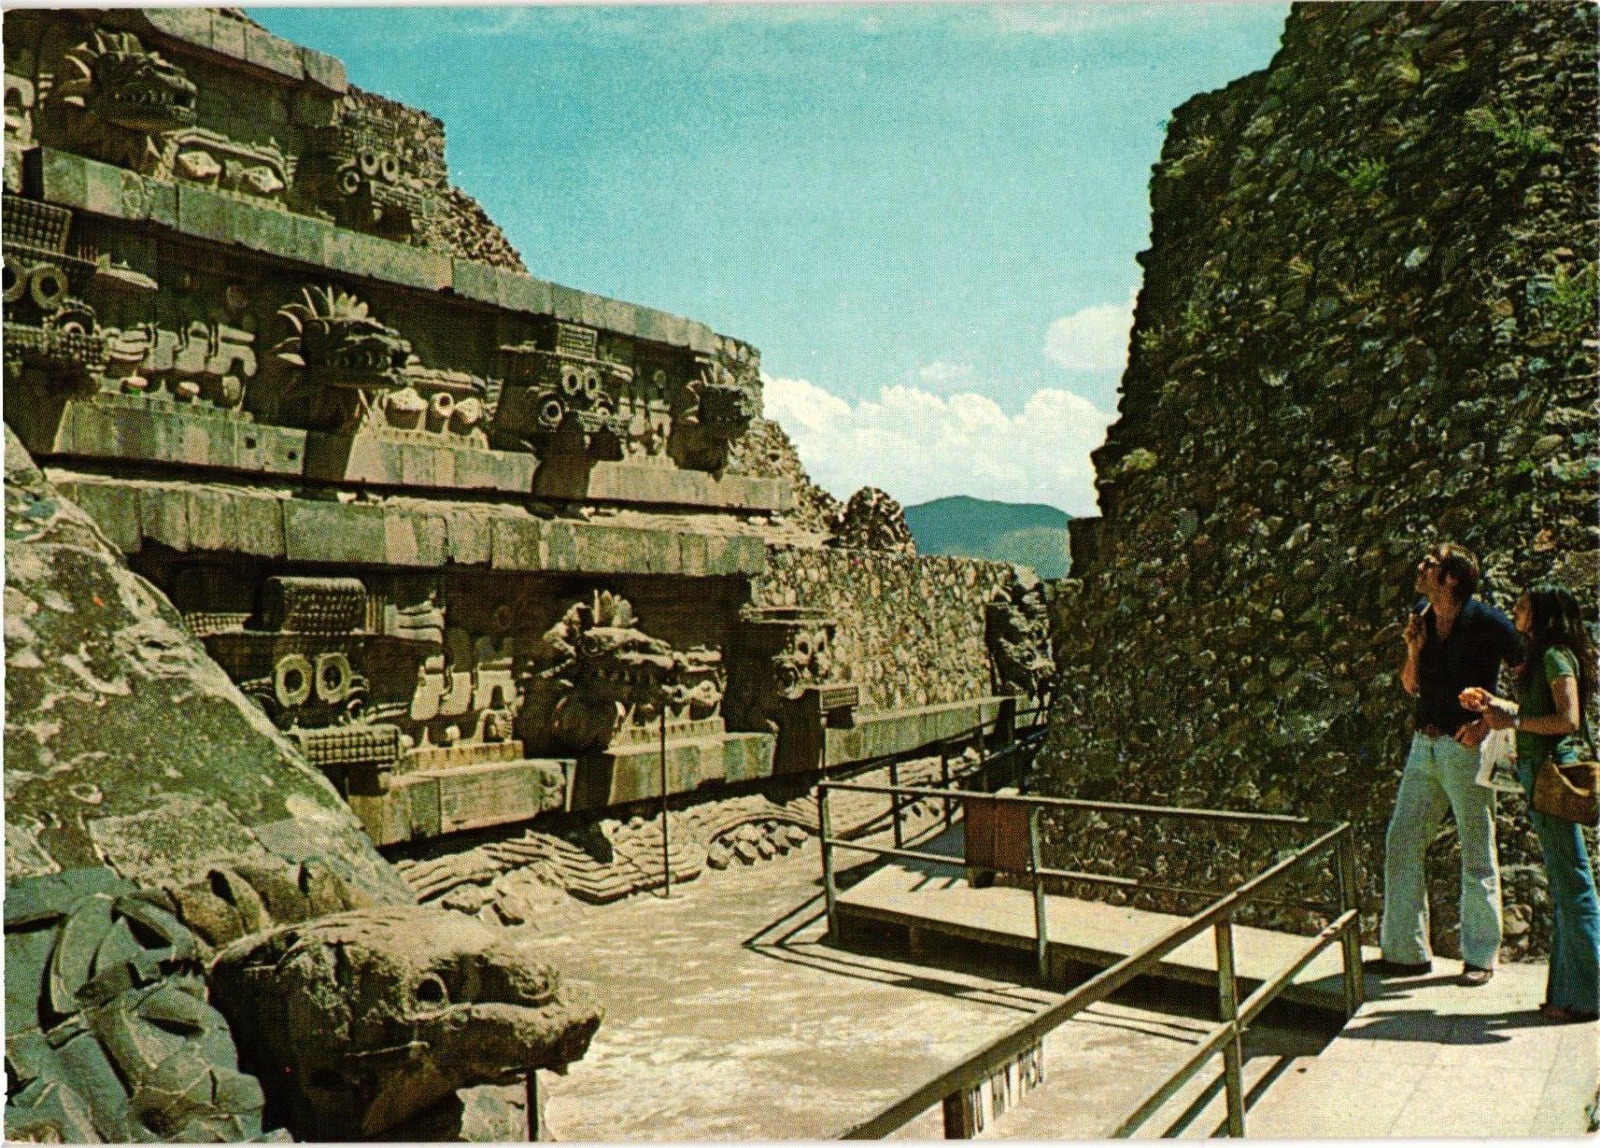 Temple of Quetzalcoatl Teotihuacan Mexico Multi View Postcard Unposted